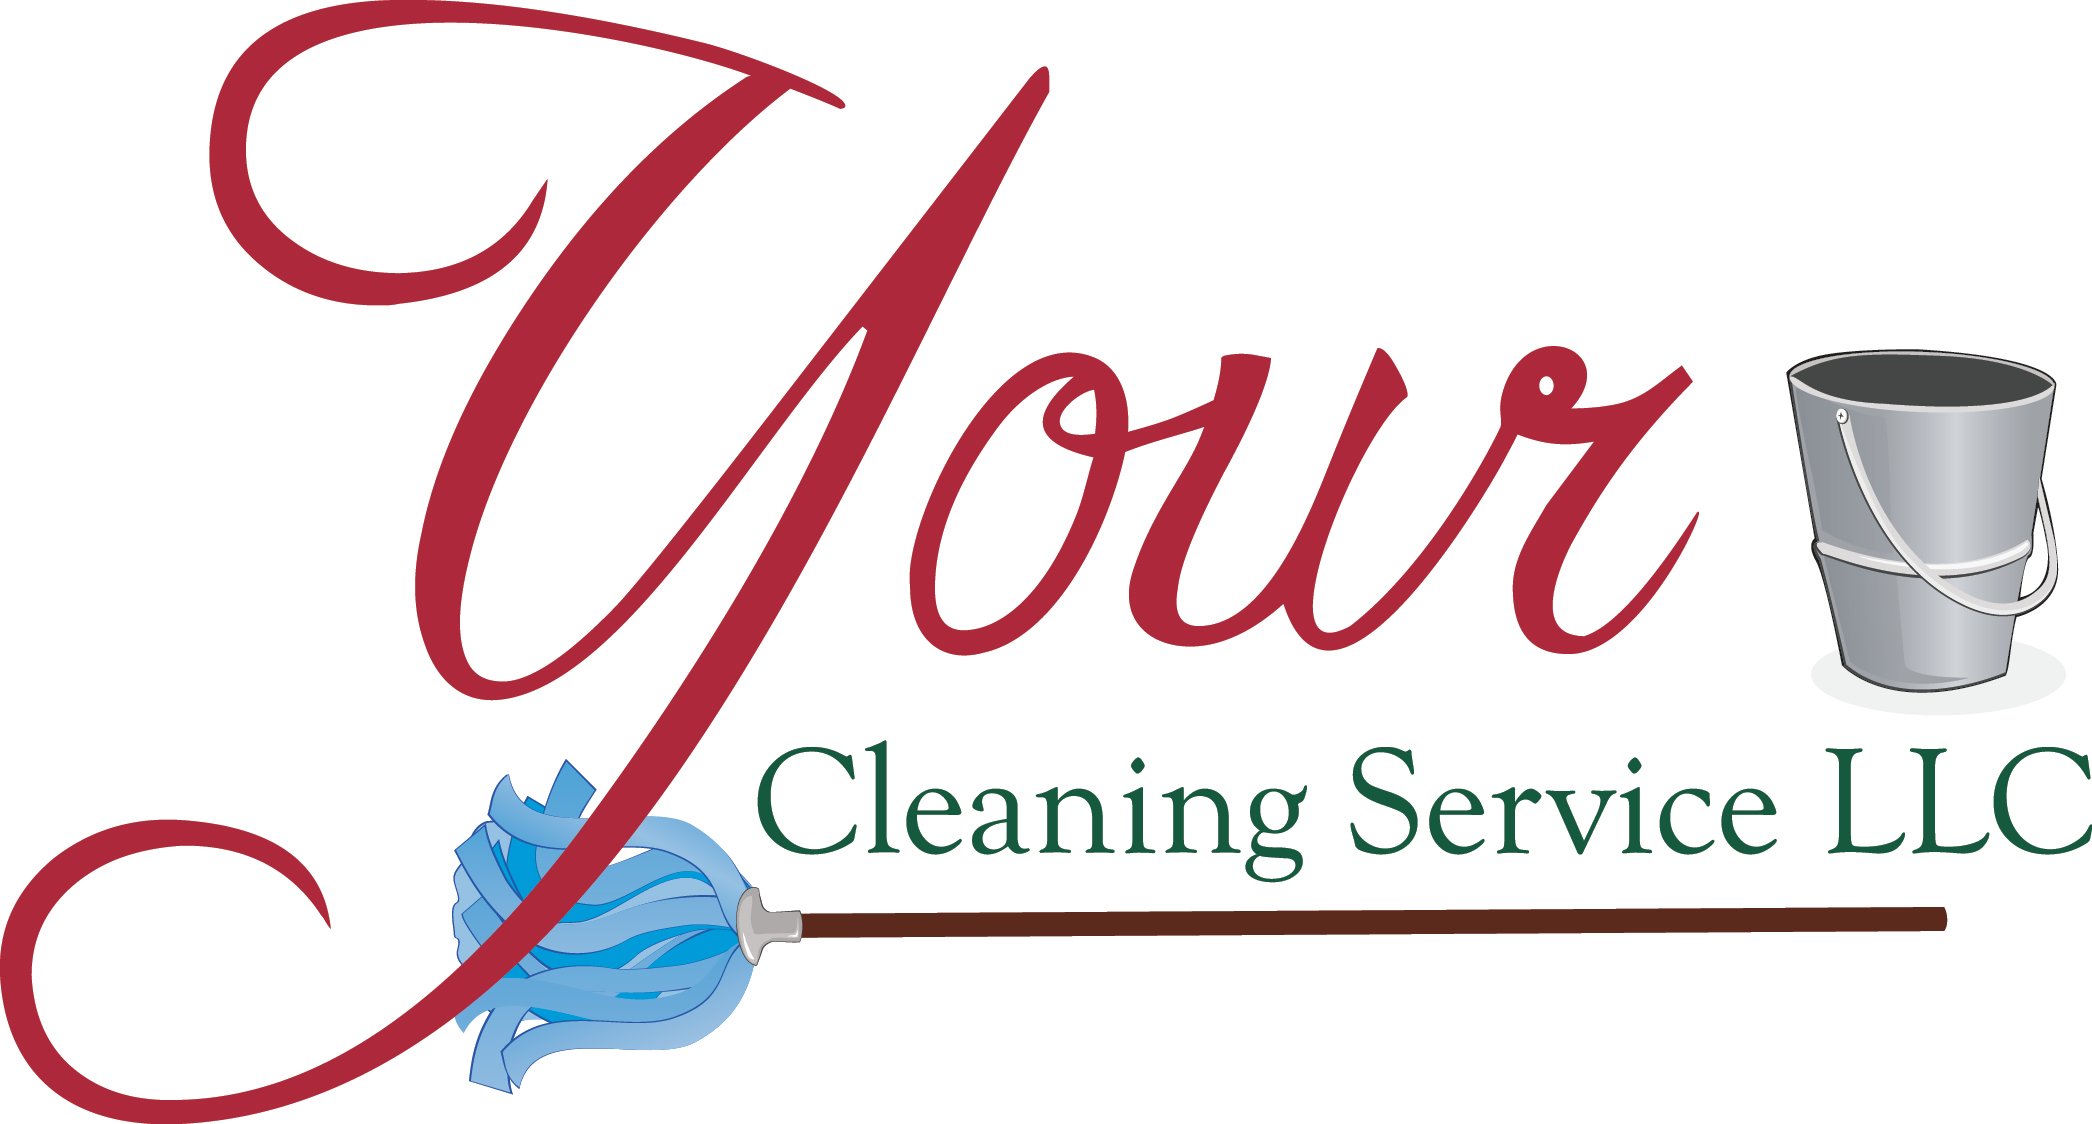 Your Cleaning Service, LLC Logo